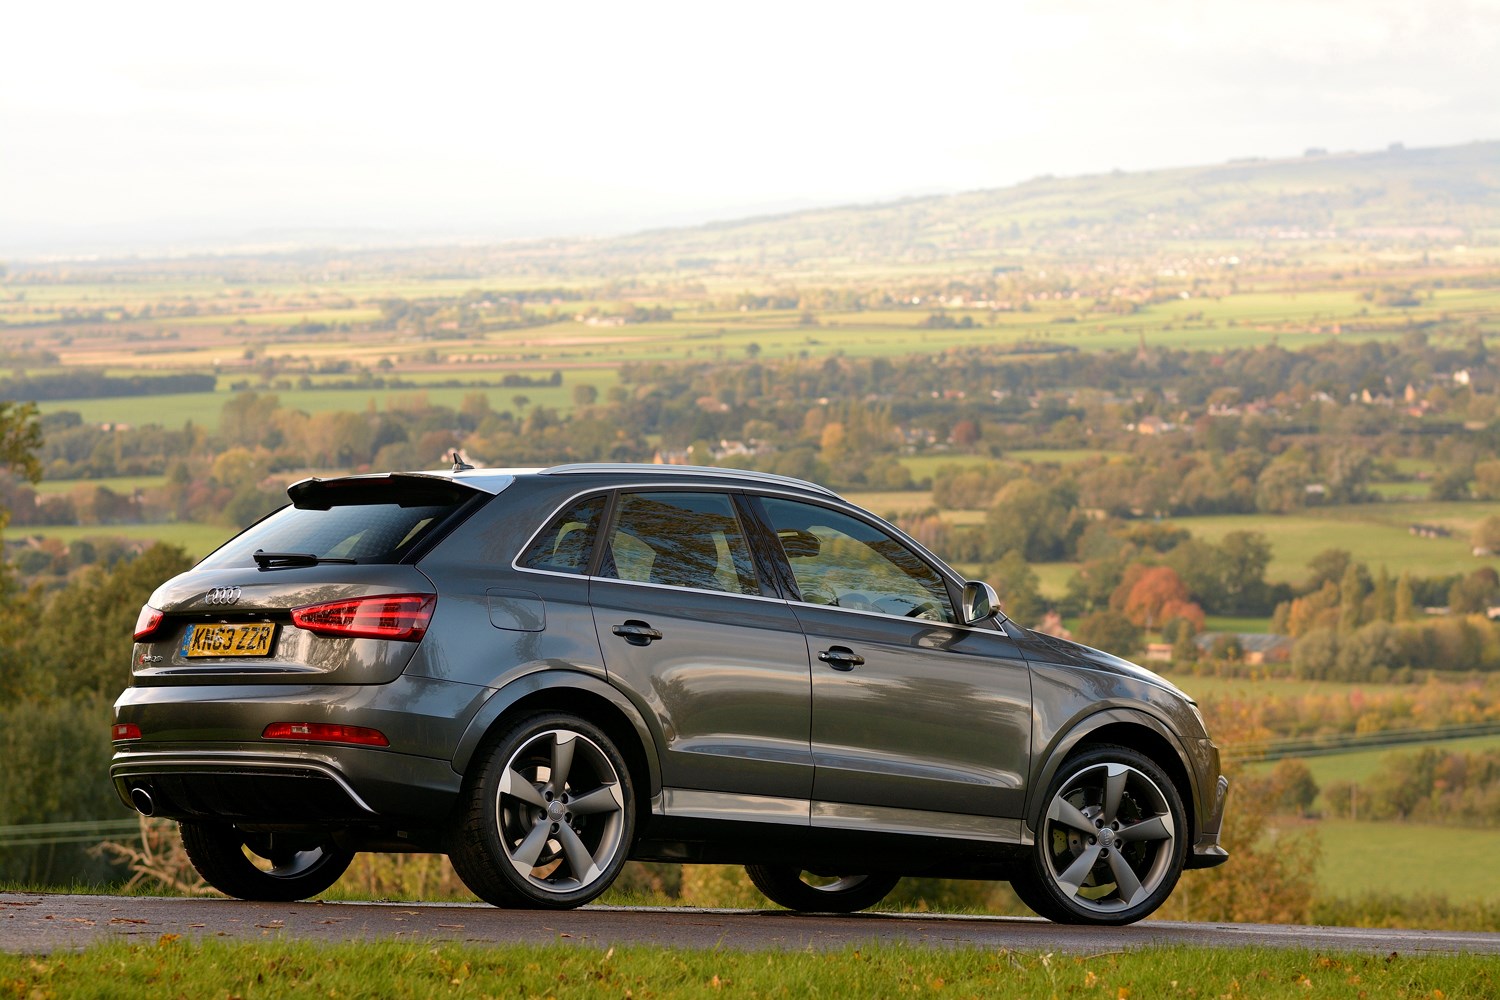 Used Audi Q3 RS (2013 - 2017) Review | Parkers